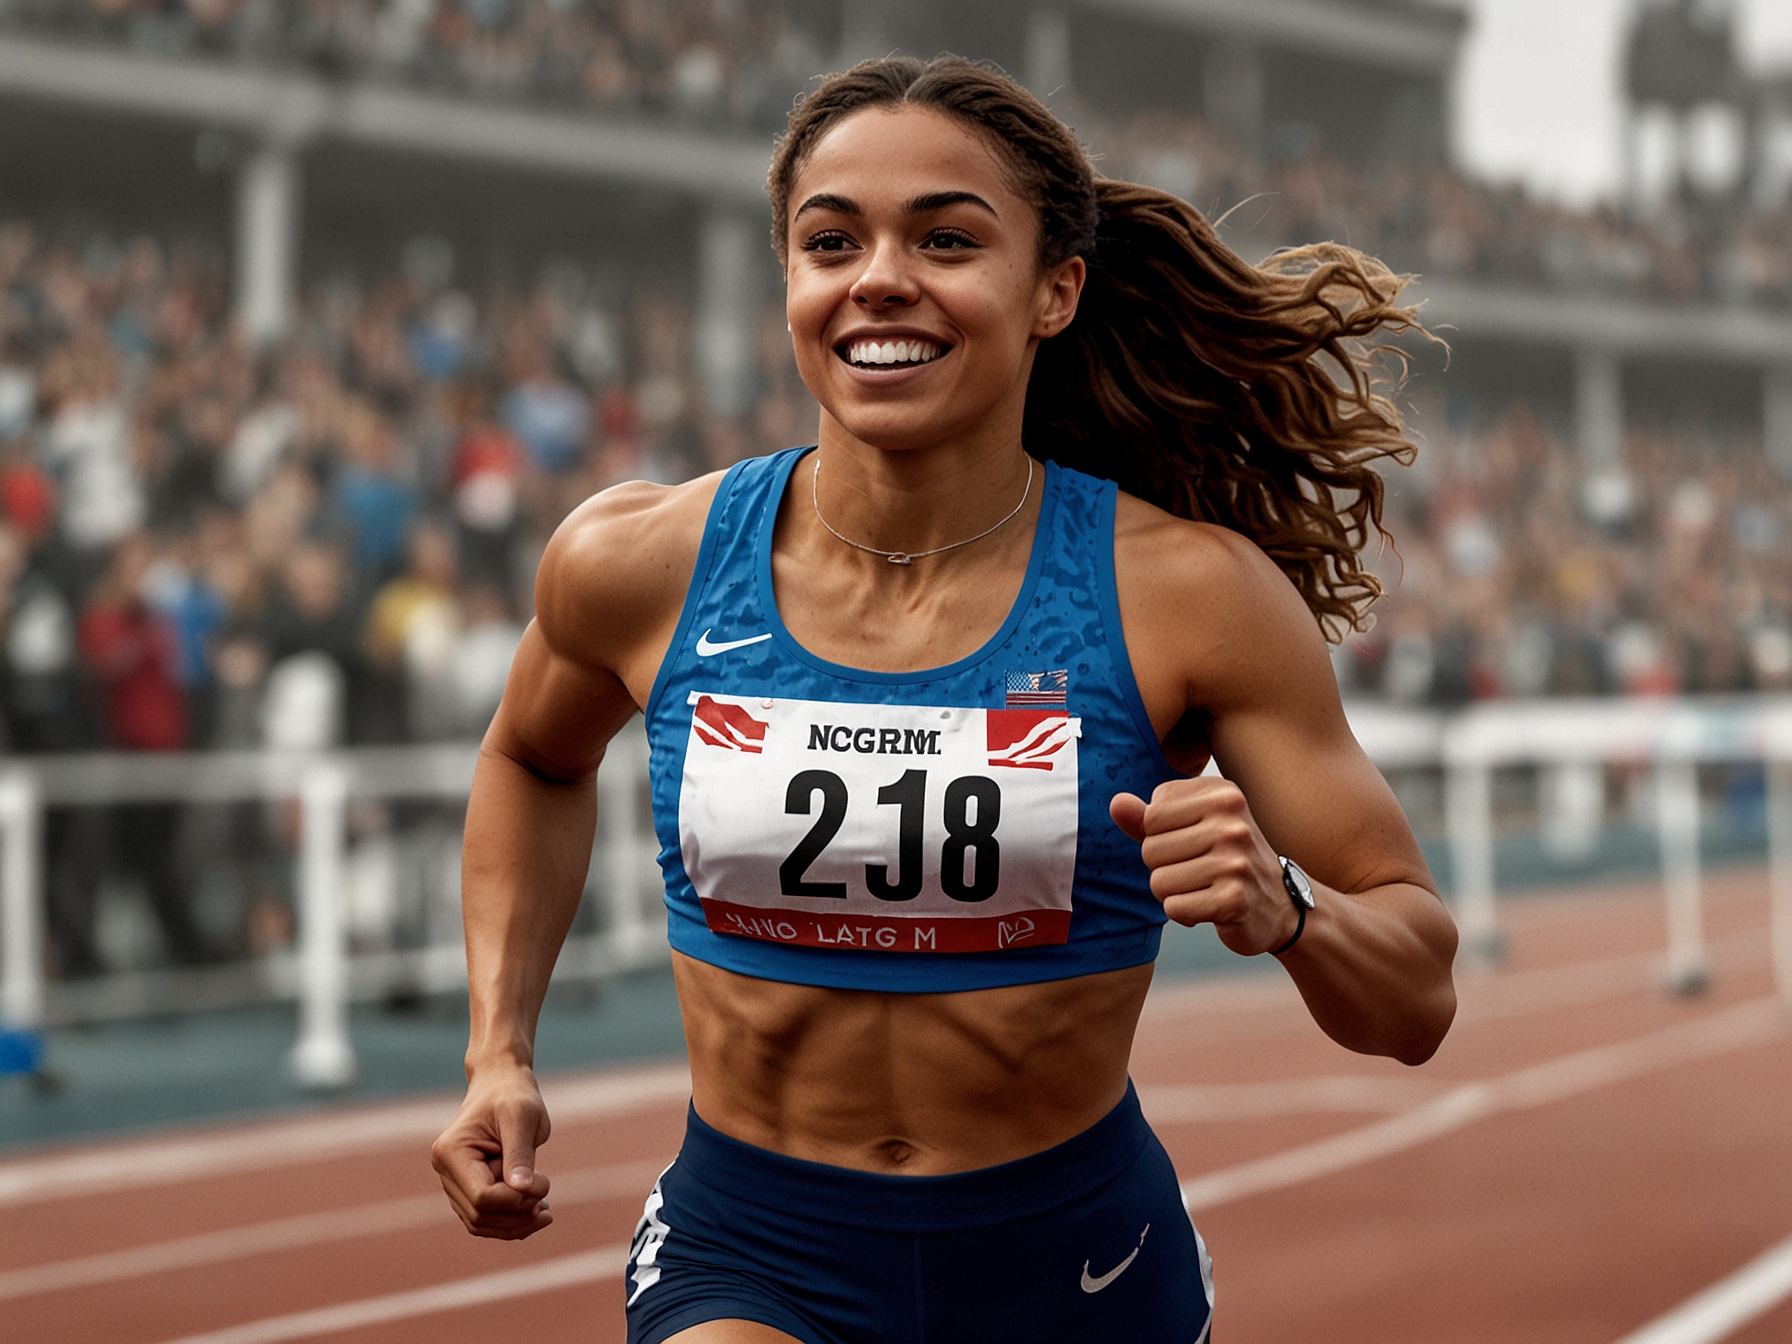 Sydney McLaughlin-Levrone crossing the finish line at the U.S. Olympic Track & Field Trials, setting a new world record in the 400m hurdles with a time of 51.90 seconds.